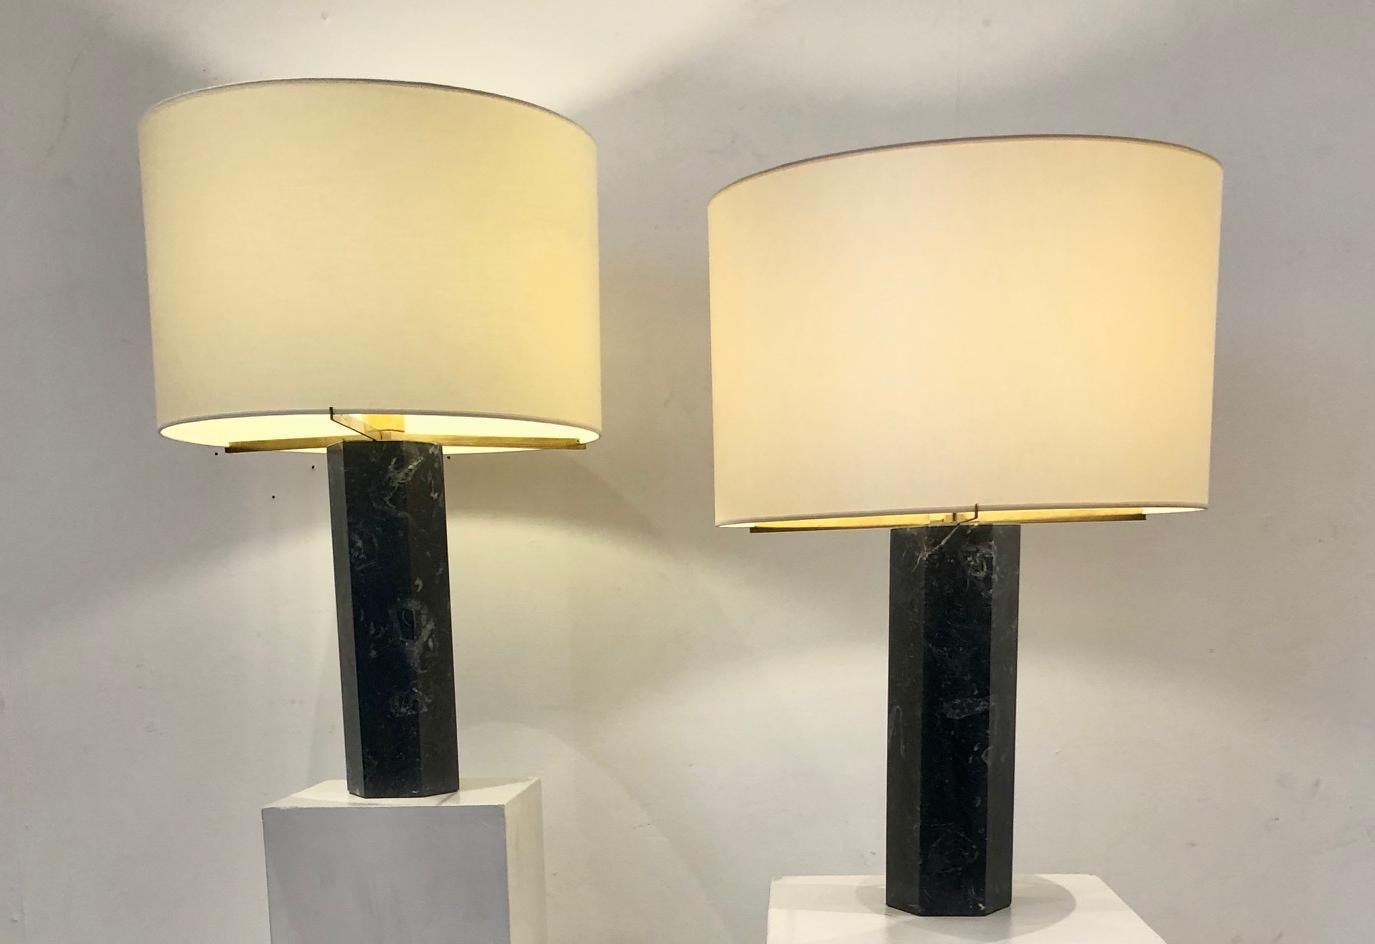 Pair of table lamps in black marble by Jules Wabbes, new shade.
Measures: 44.5 cm x 66 cm with shade,
40 cm x 43.5 cm without shade.